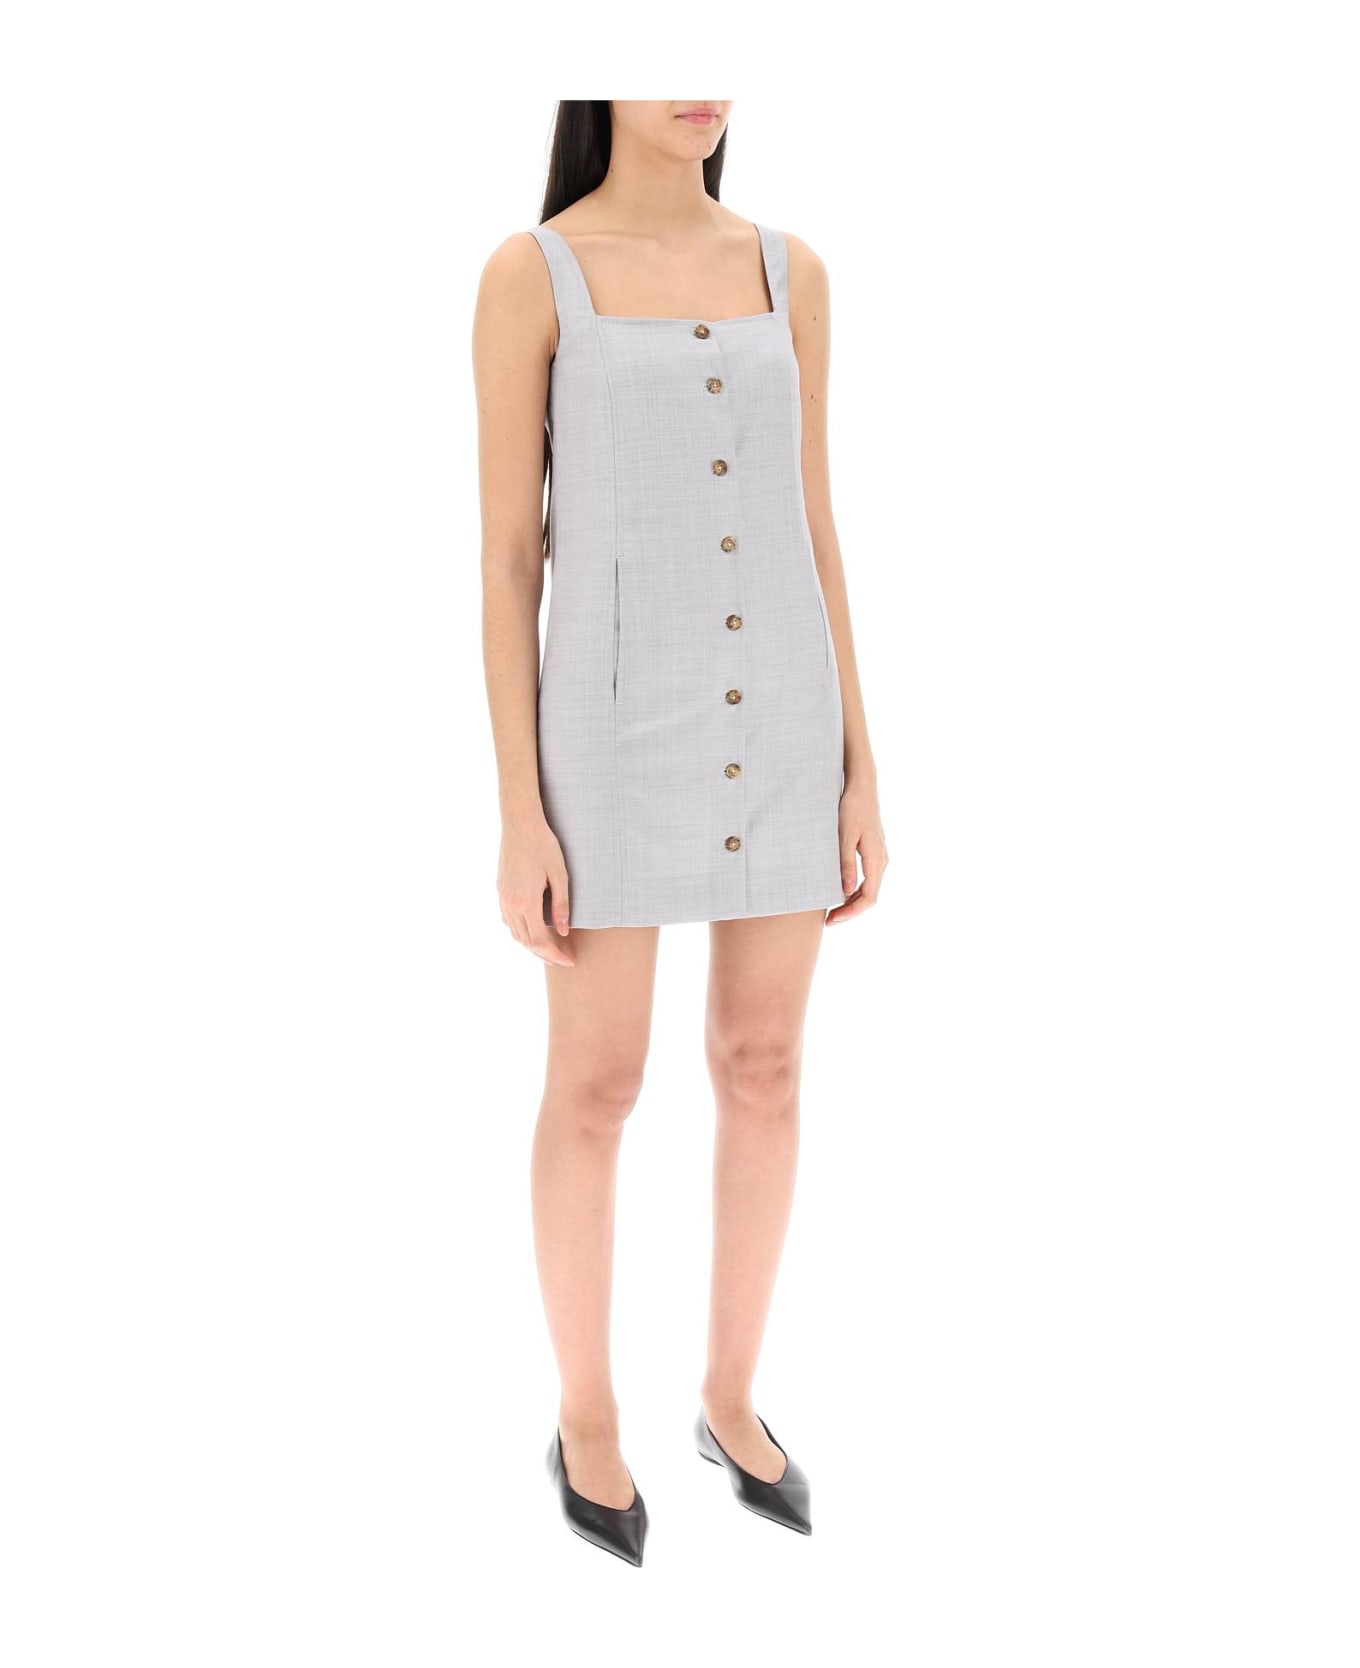 Loulou Studio Buttoned Pinafore Dress - FEATHER GREY MELANGE (Grey)